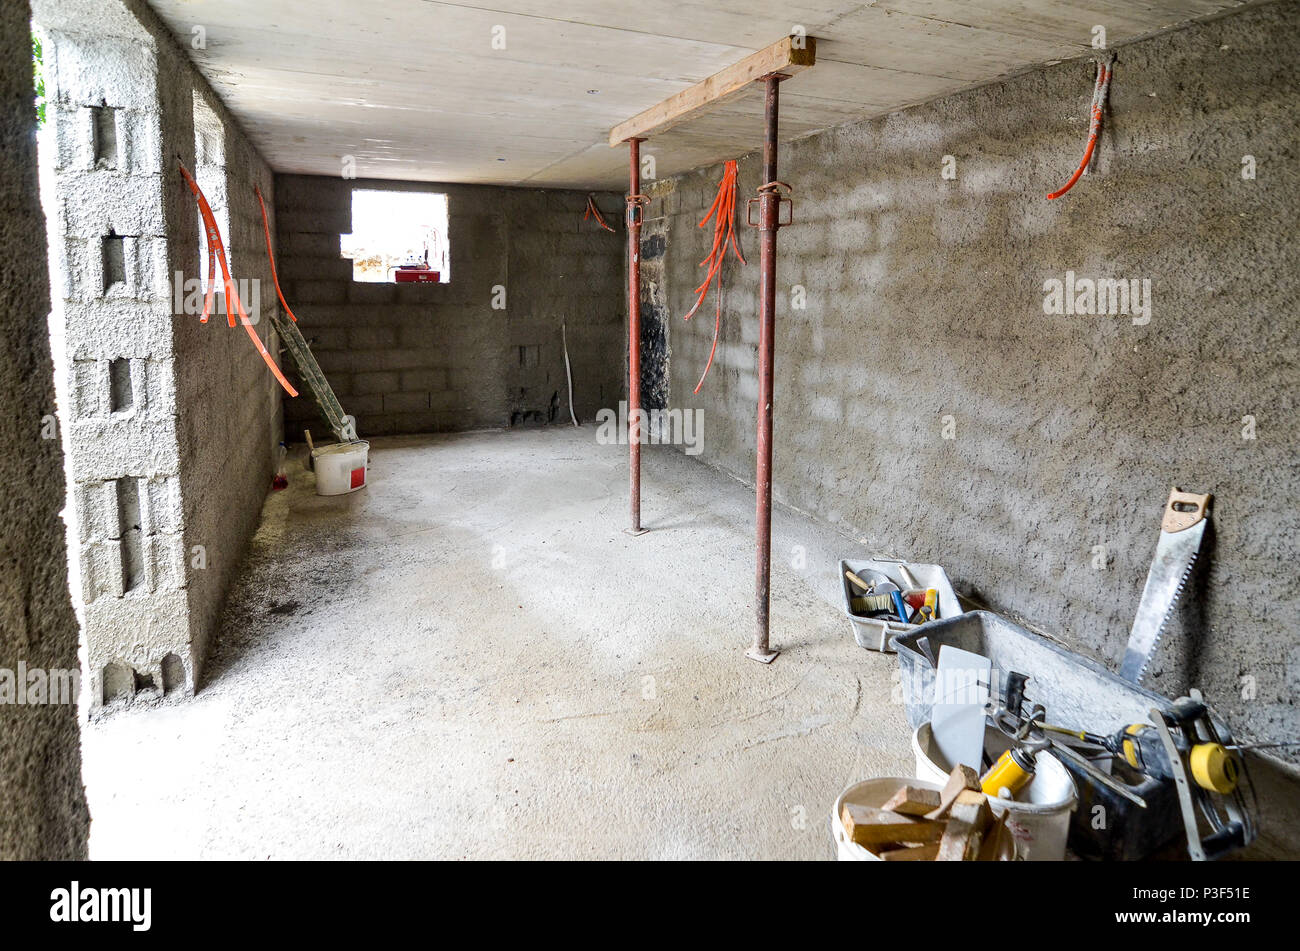 Plastering, rebuilding, waterproofing basement or a cellar and work tools.  Construction of residential house cellar or basement with electric installa  Stock Photo - Alamy